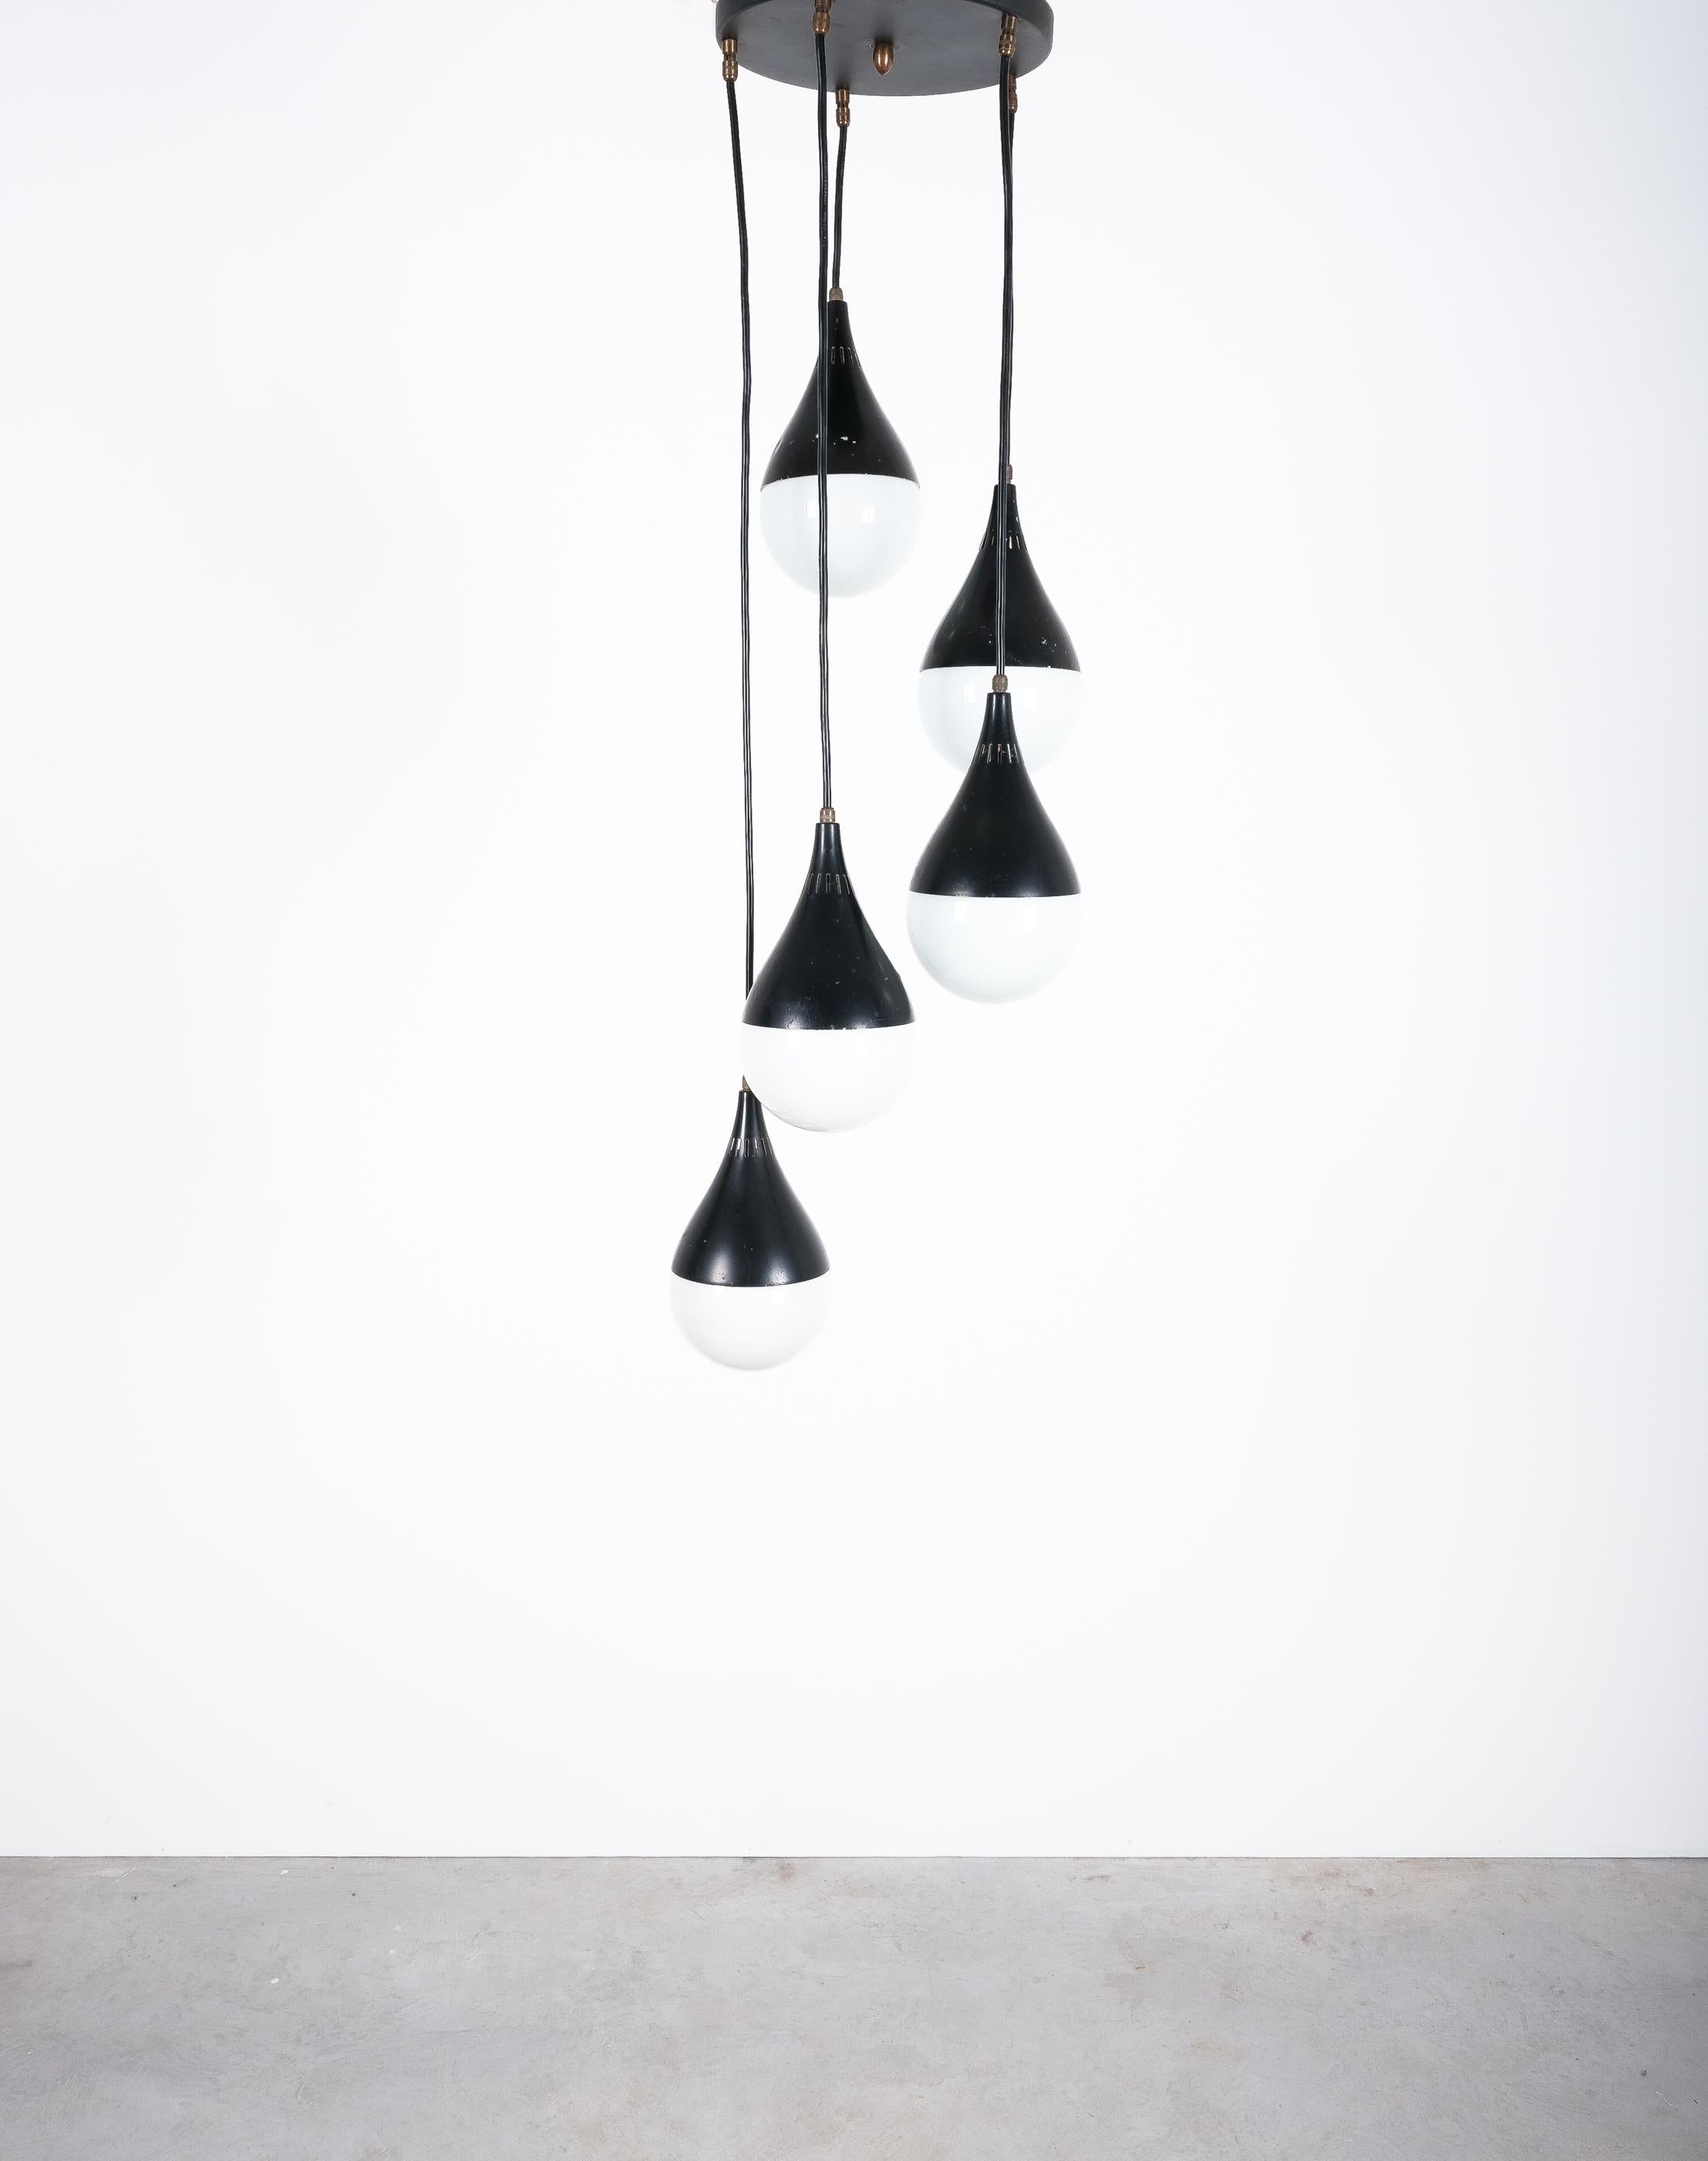 Stilnovo pear-shaped ball pendant with satin glass, Italy, circa 1950

Black mid-century modern suspension light by the Italian brand Stilnovo. Beautiful pendant light with multiple lacquered trumpet-shaped aluminum hardware and opal spheres